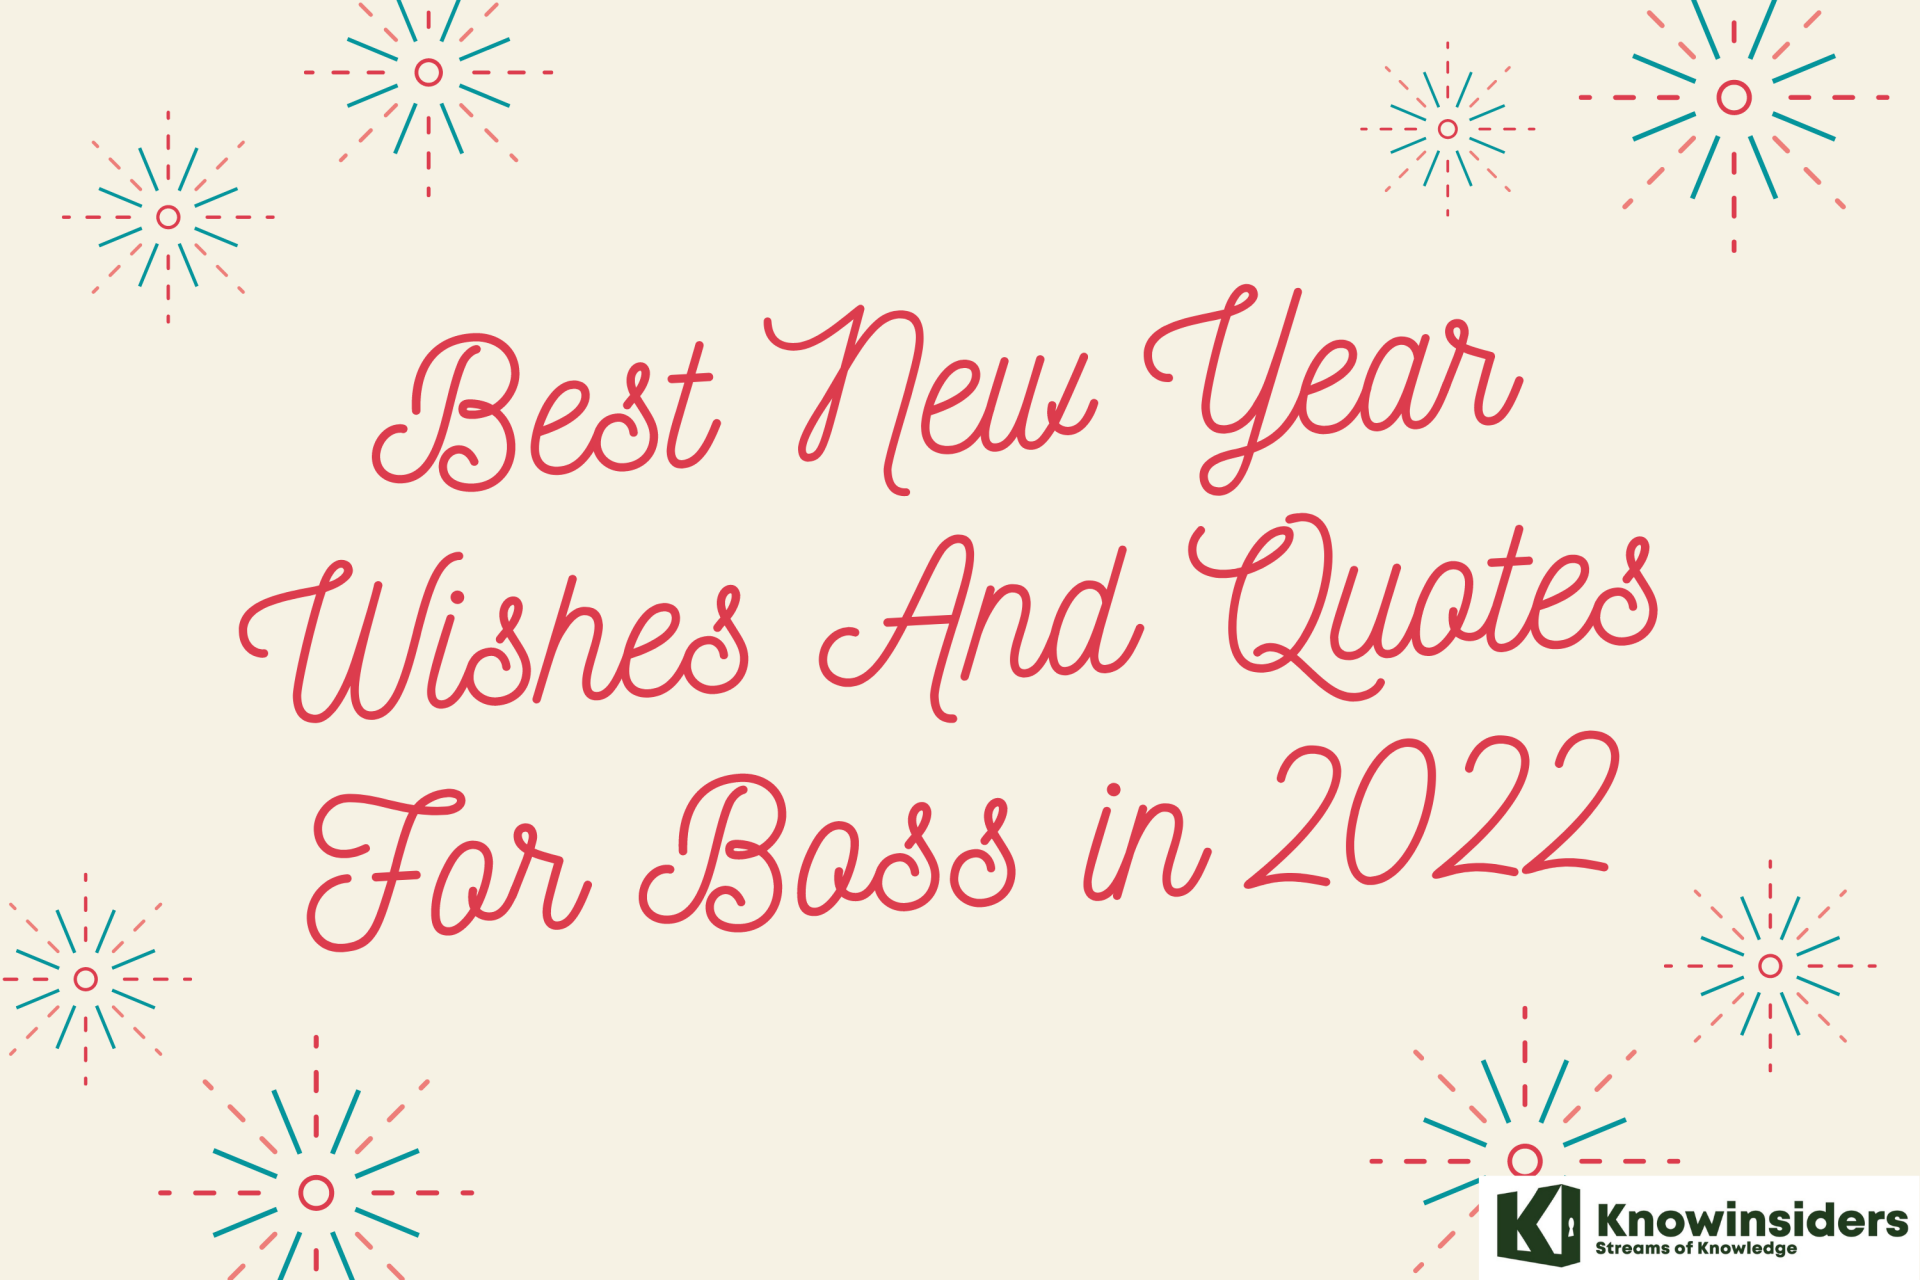 Best New Year Wishes And Quotes For Boss